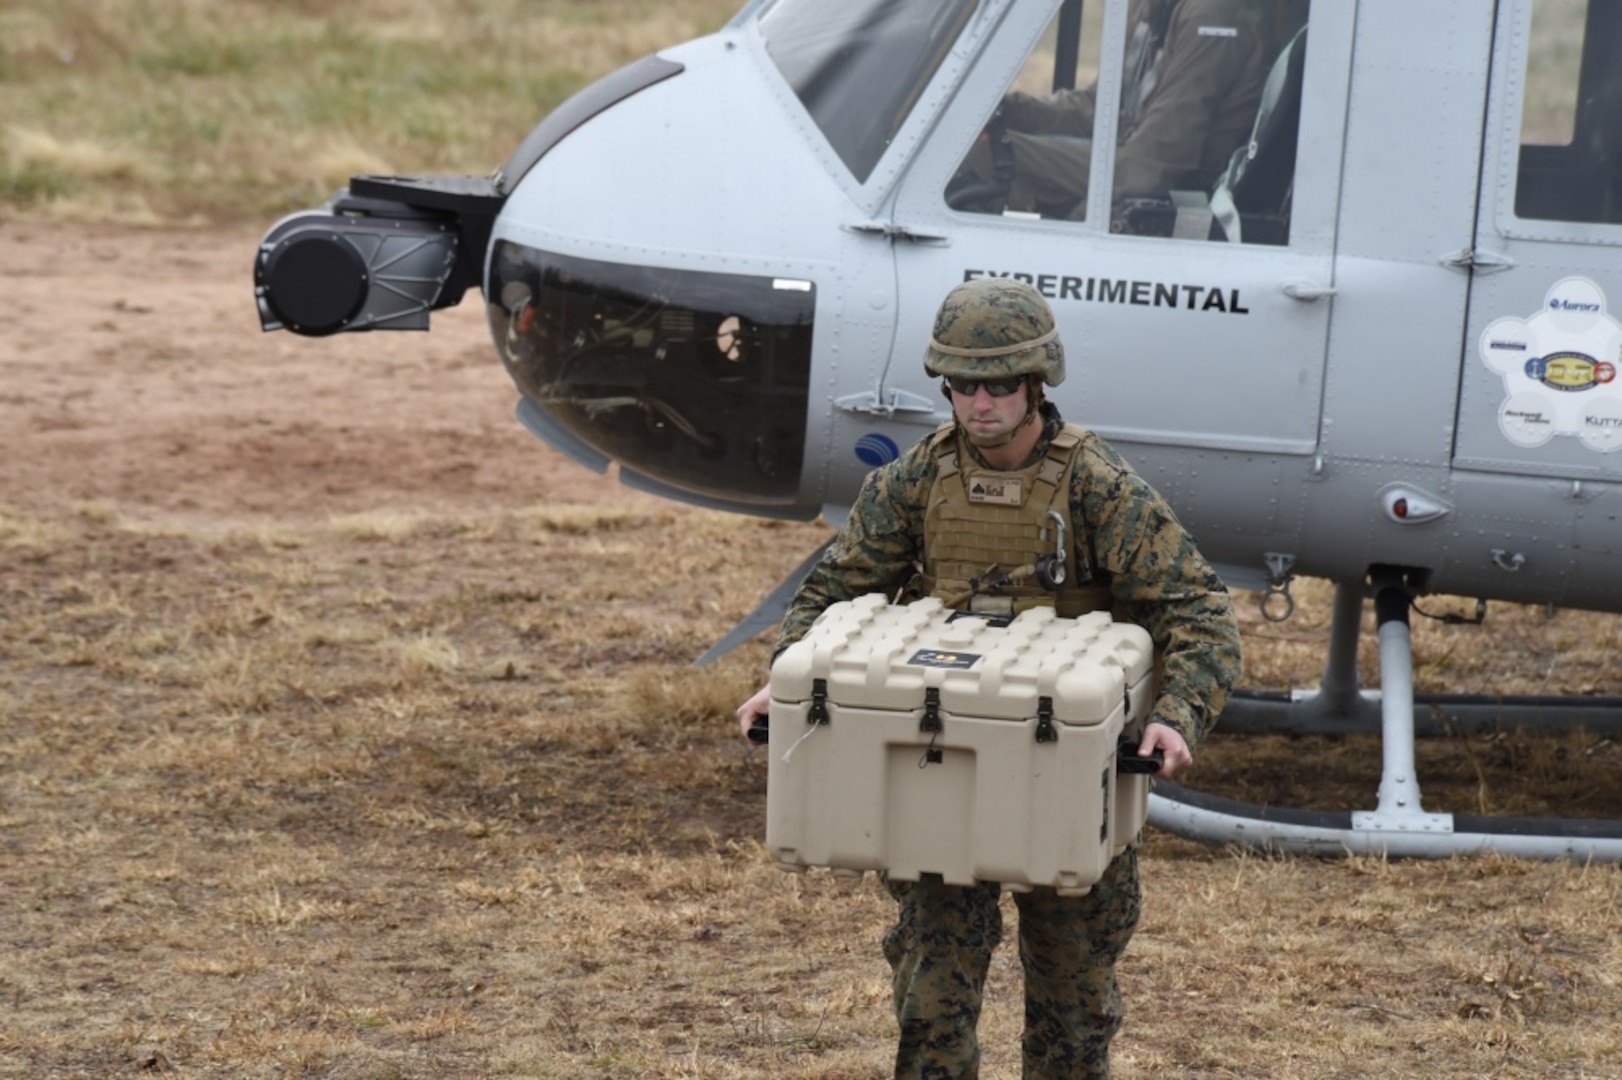 A Marine offloads cargo from a UH-1 Huey helicopter equipped with an Office of Naval Research-sponsored Autonomous Aerial Cargo/Utility System autonomy kit following a landing during final testing at Marine Corps Base Quantico, Va.